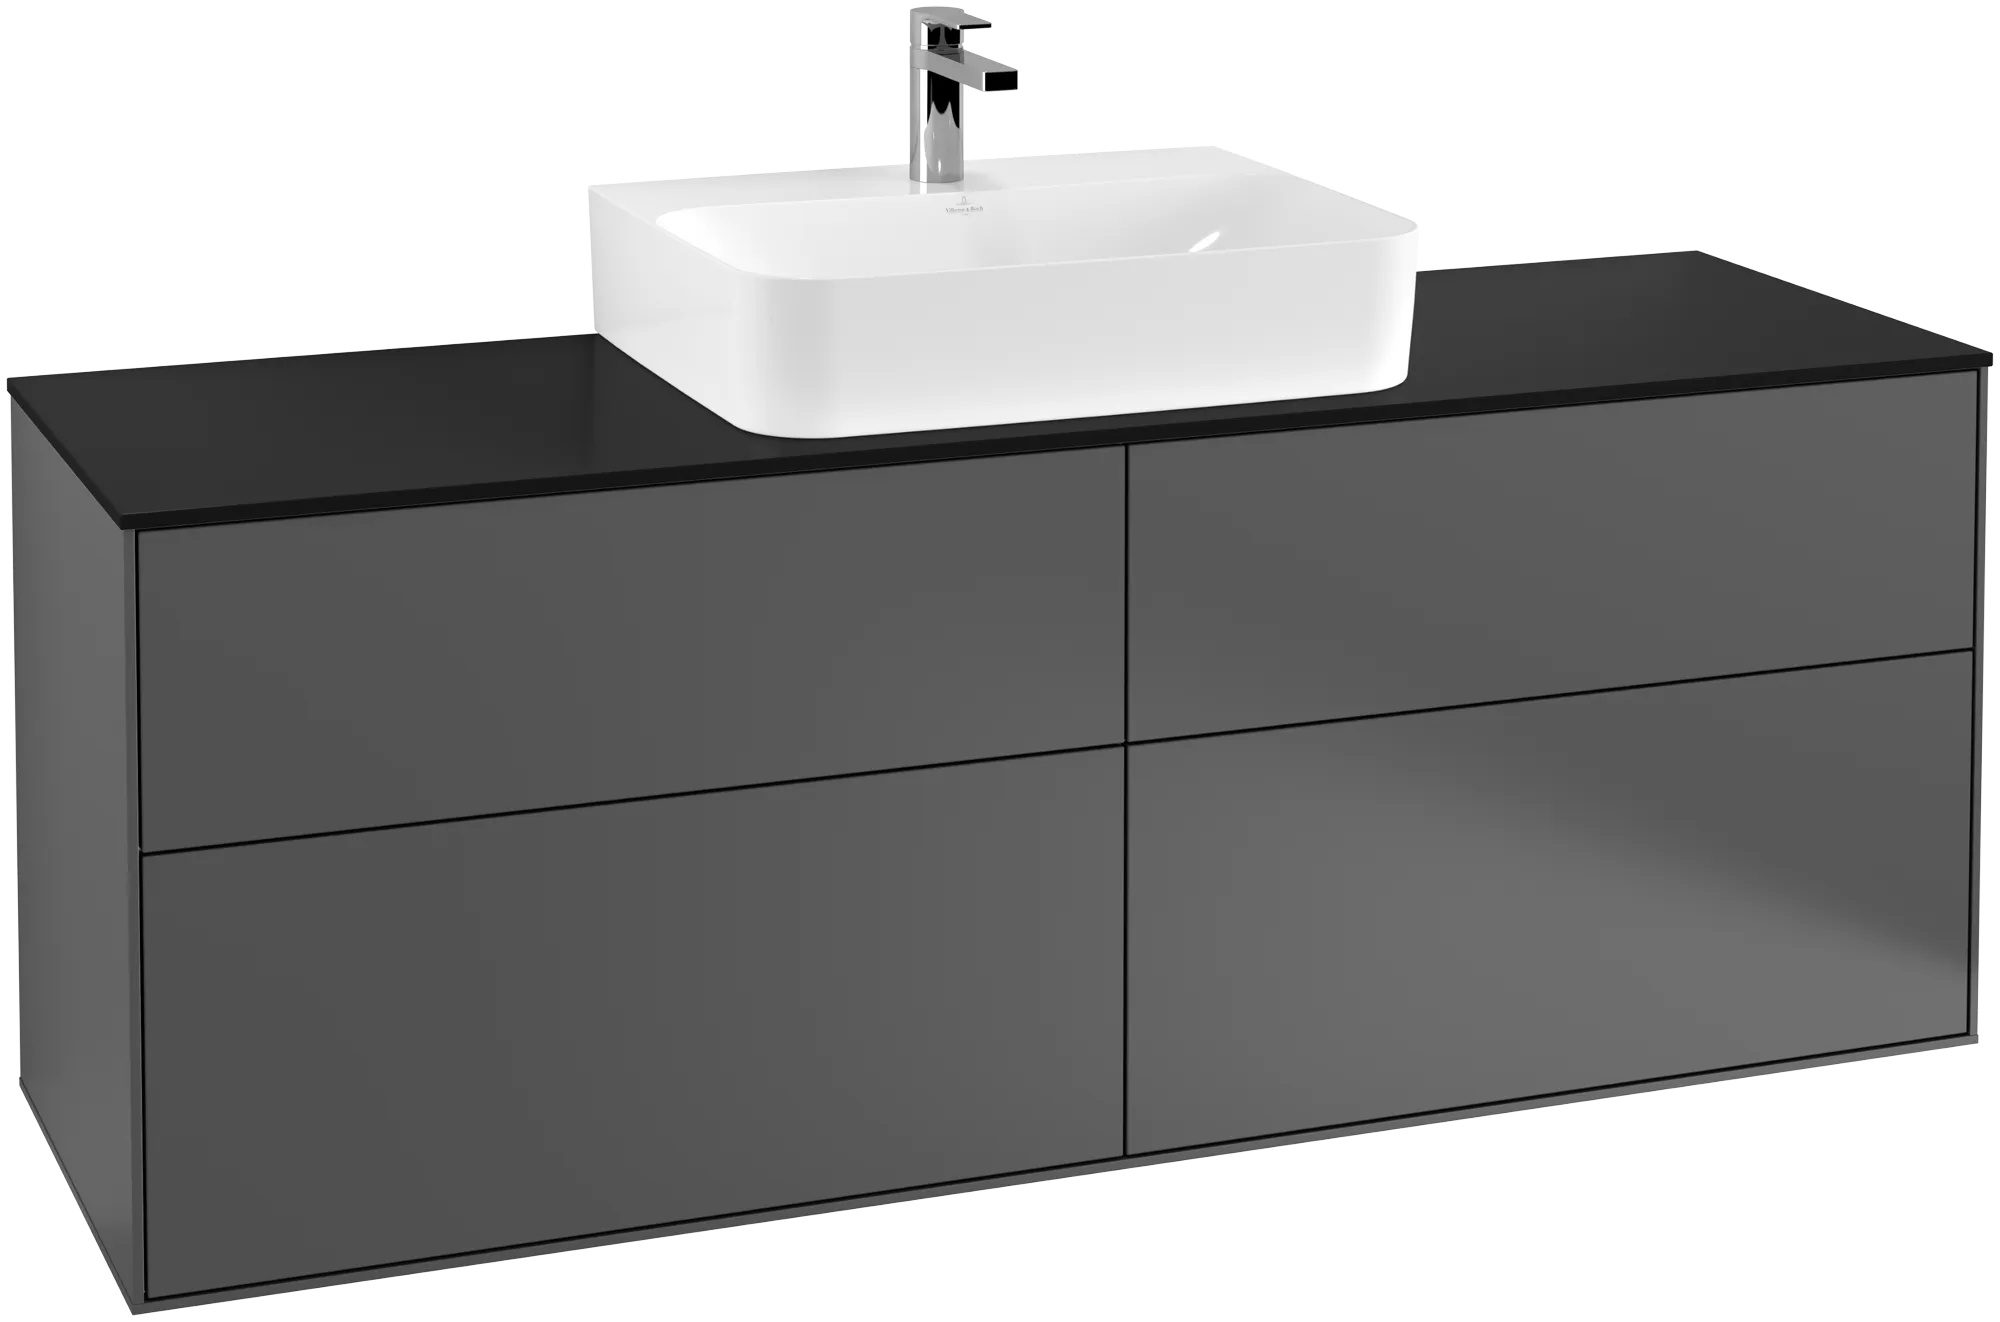 Obrázek VILLEROY BOCH Finion Vanity unit, with lighting, 4 pull-out compartments, 1600 x 603 x 501 mm, Anthracite Matt Lacquer / Glass Black Matt #G19200GK